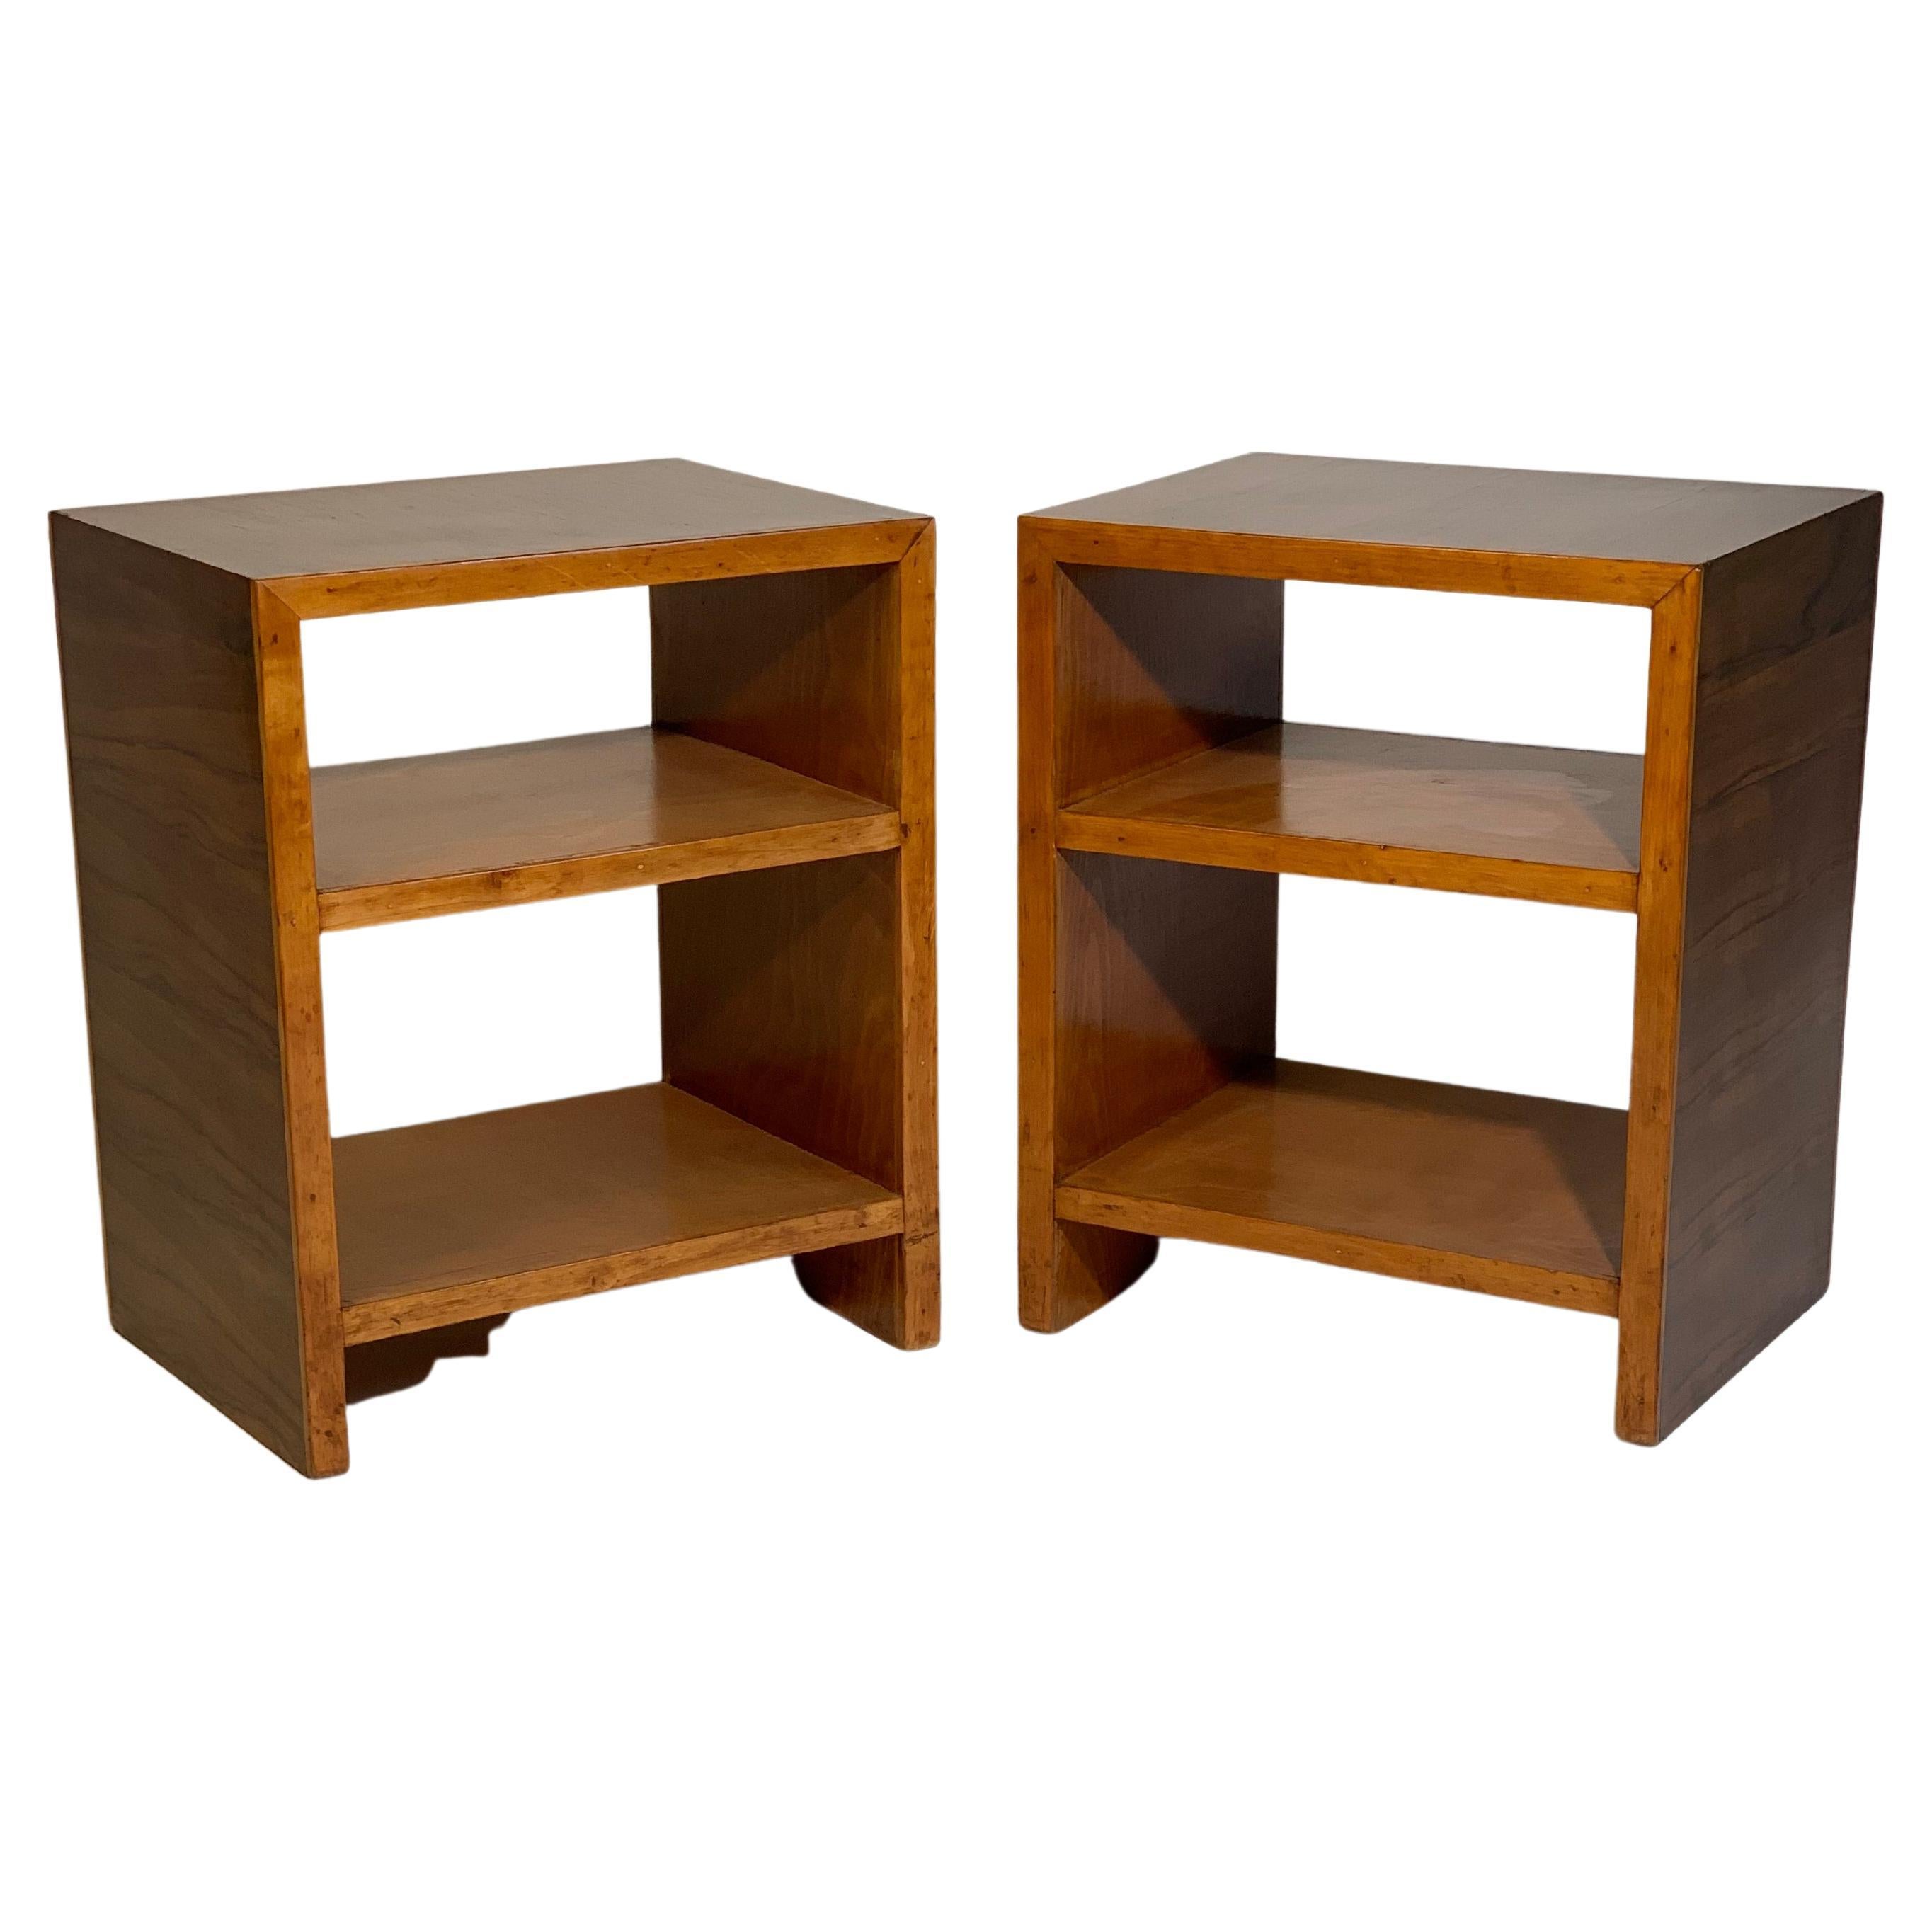 Italian Art Deco Pair Of Double Shelve Side Table Or Bed Tables